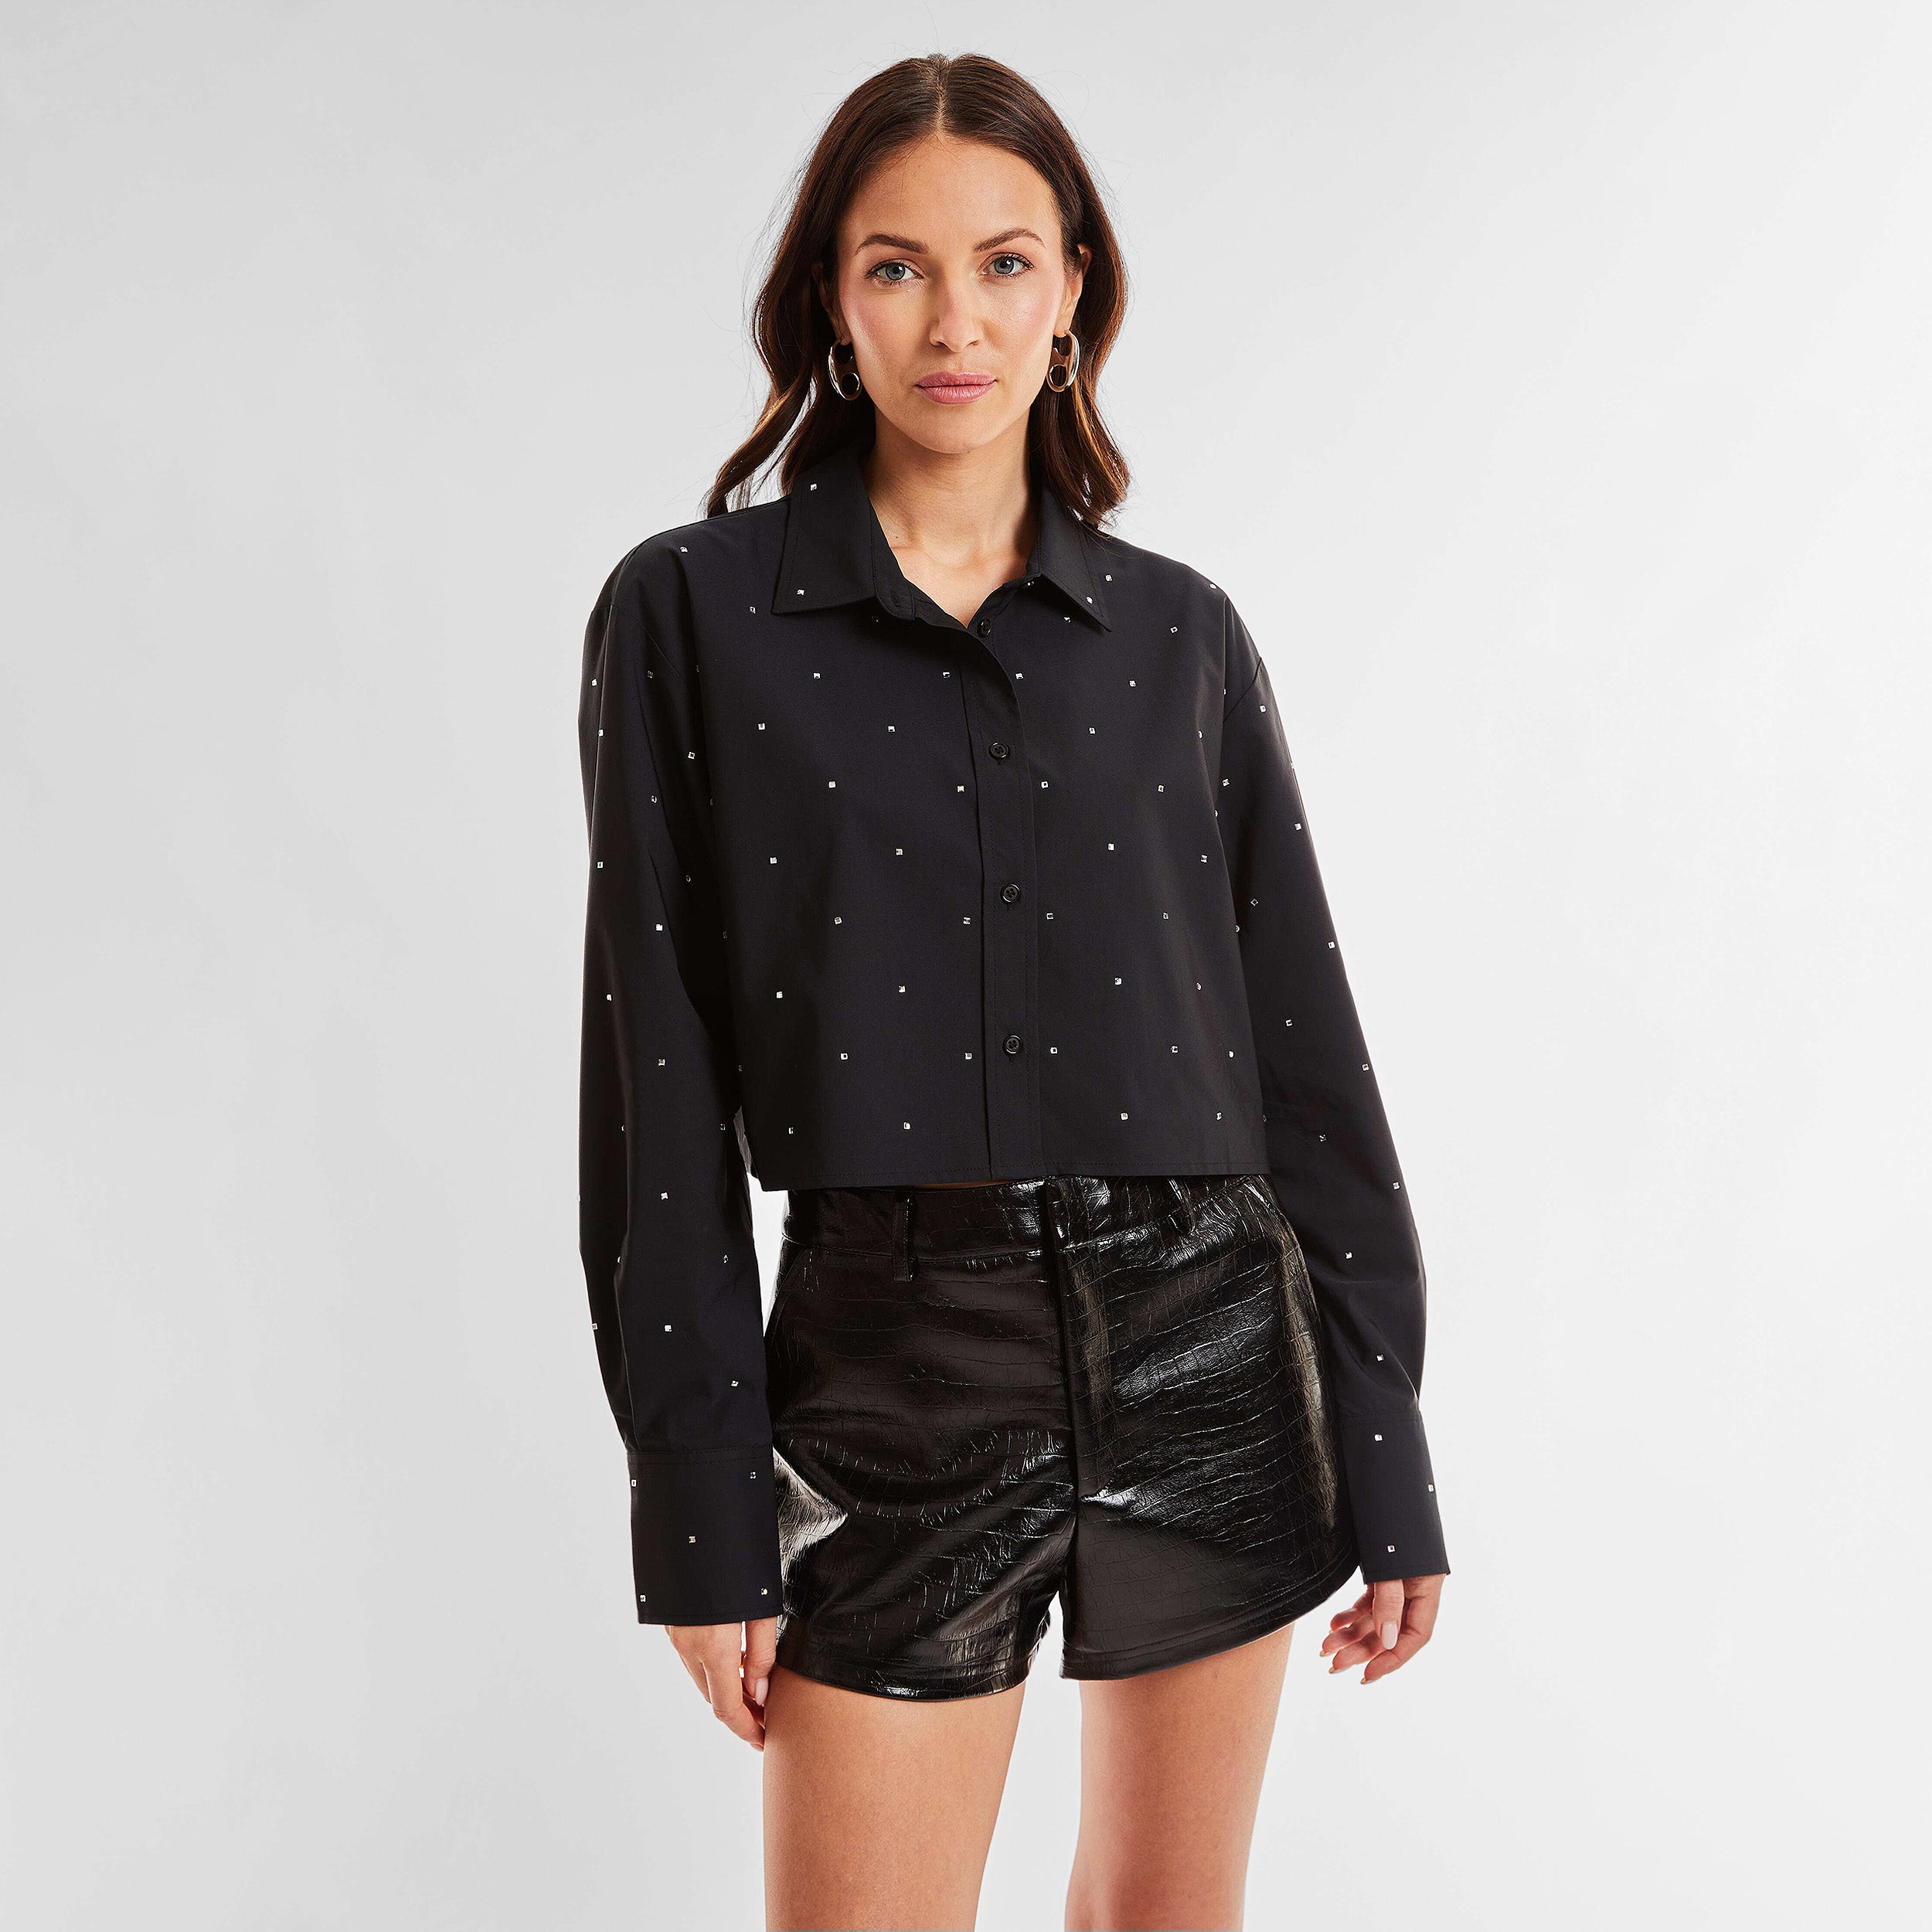 Front view of woman wearing a black cropped button down shirt with crystal embellishments.